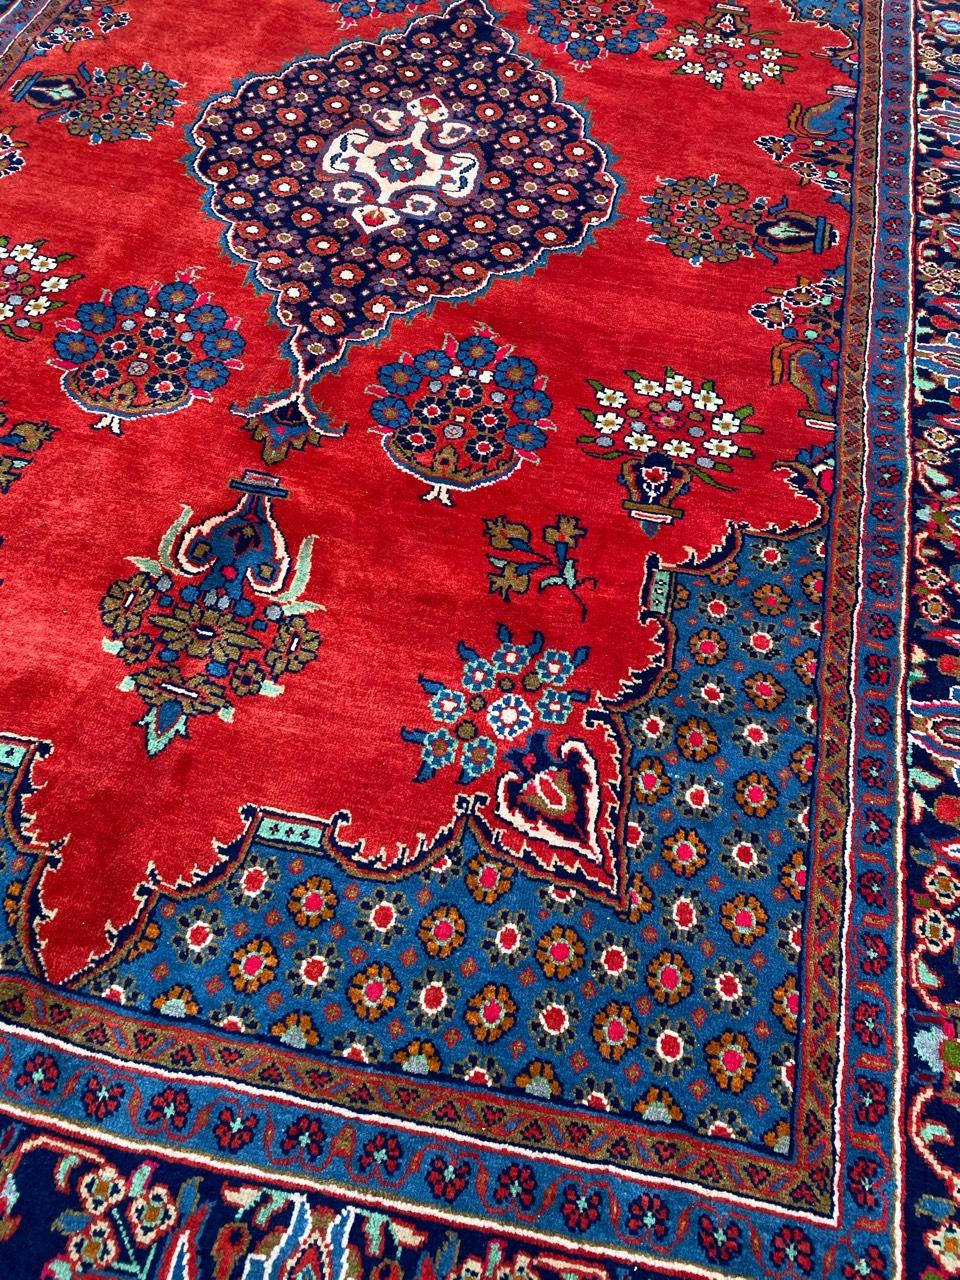 Very beautiful colorful midcentury rug with a central medallion floral design and red field with blue, green, yellow and orange, entirely hand knotted with wool velvet on cotton foundation.

✨✨✨
